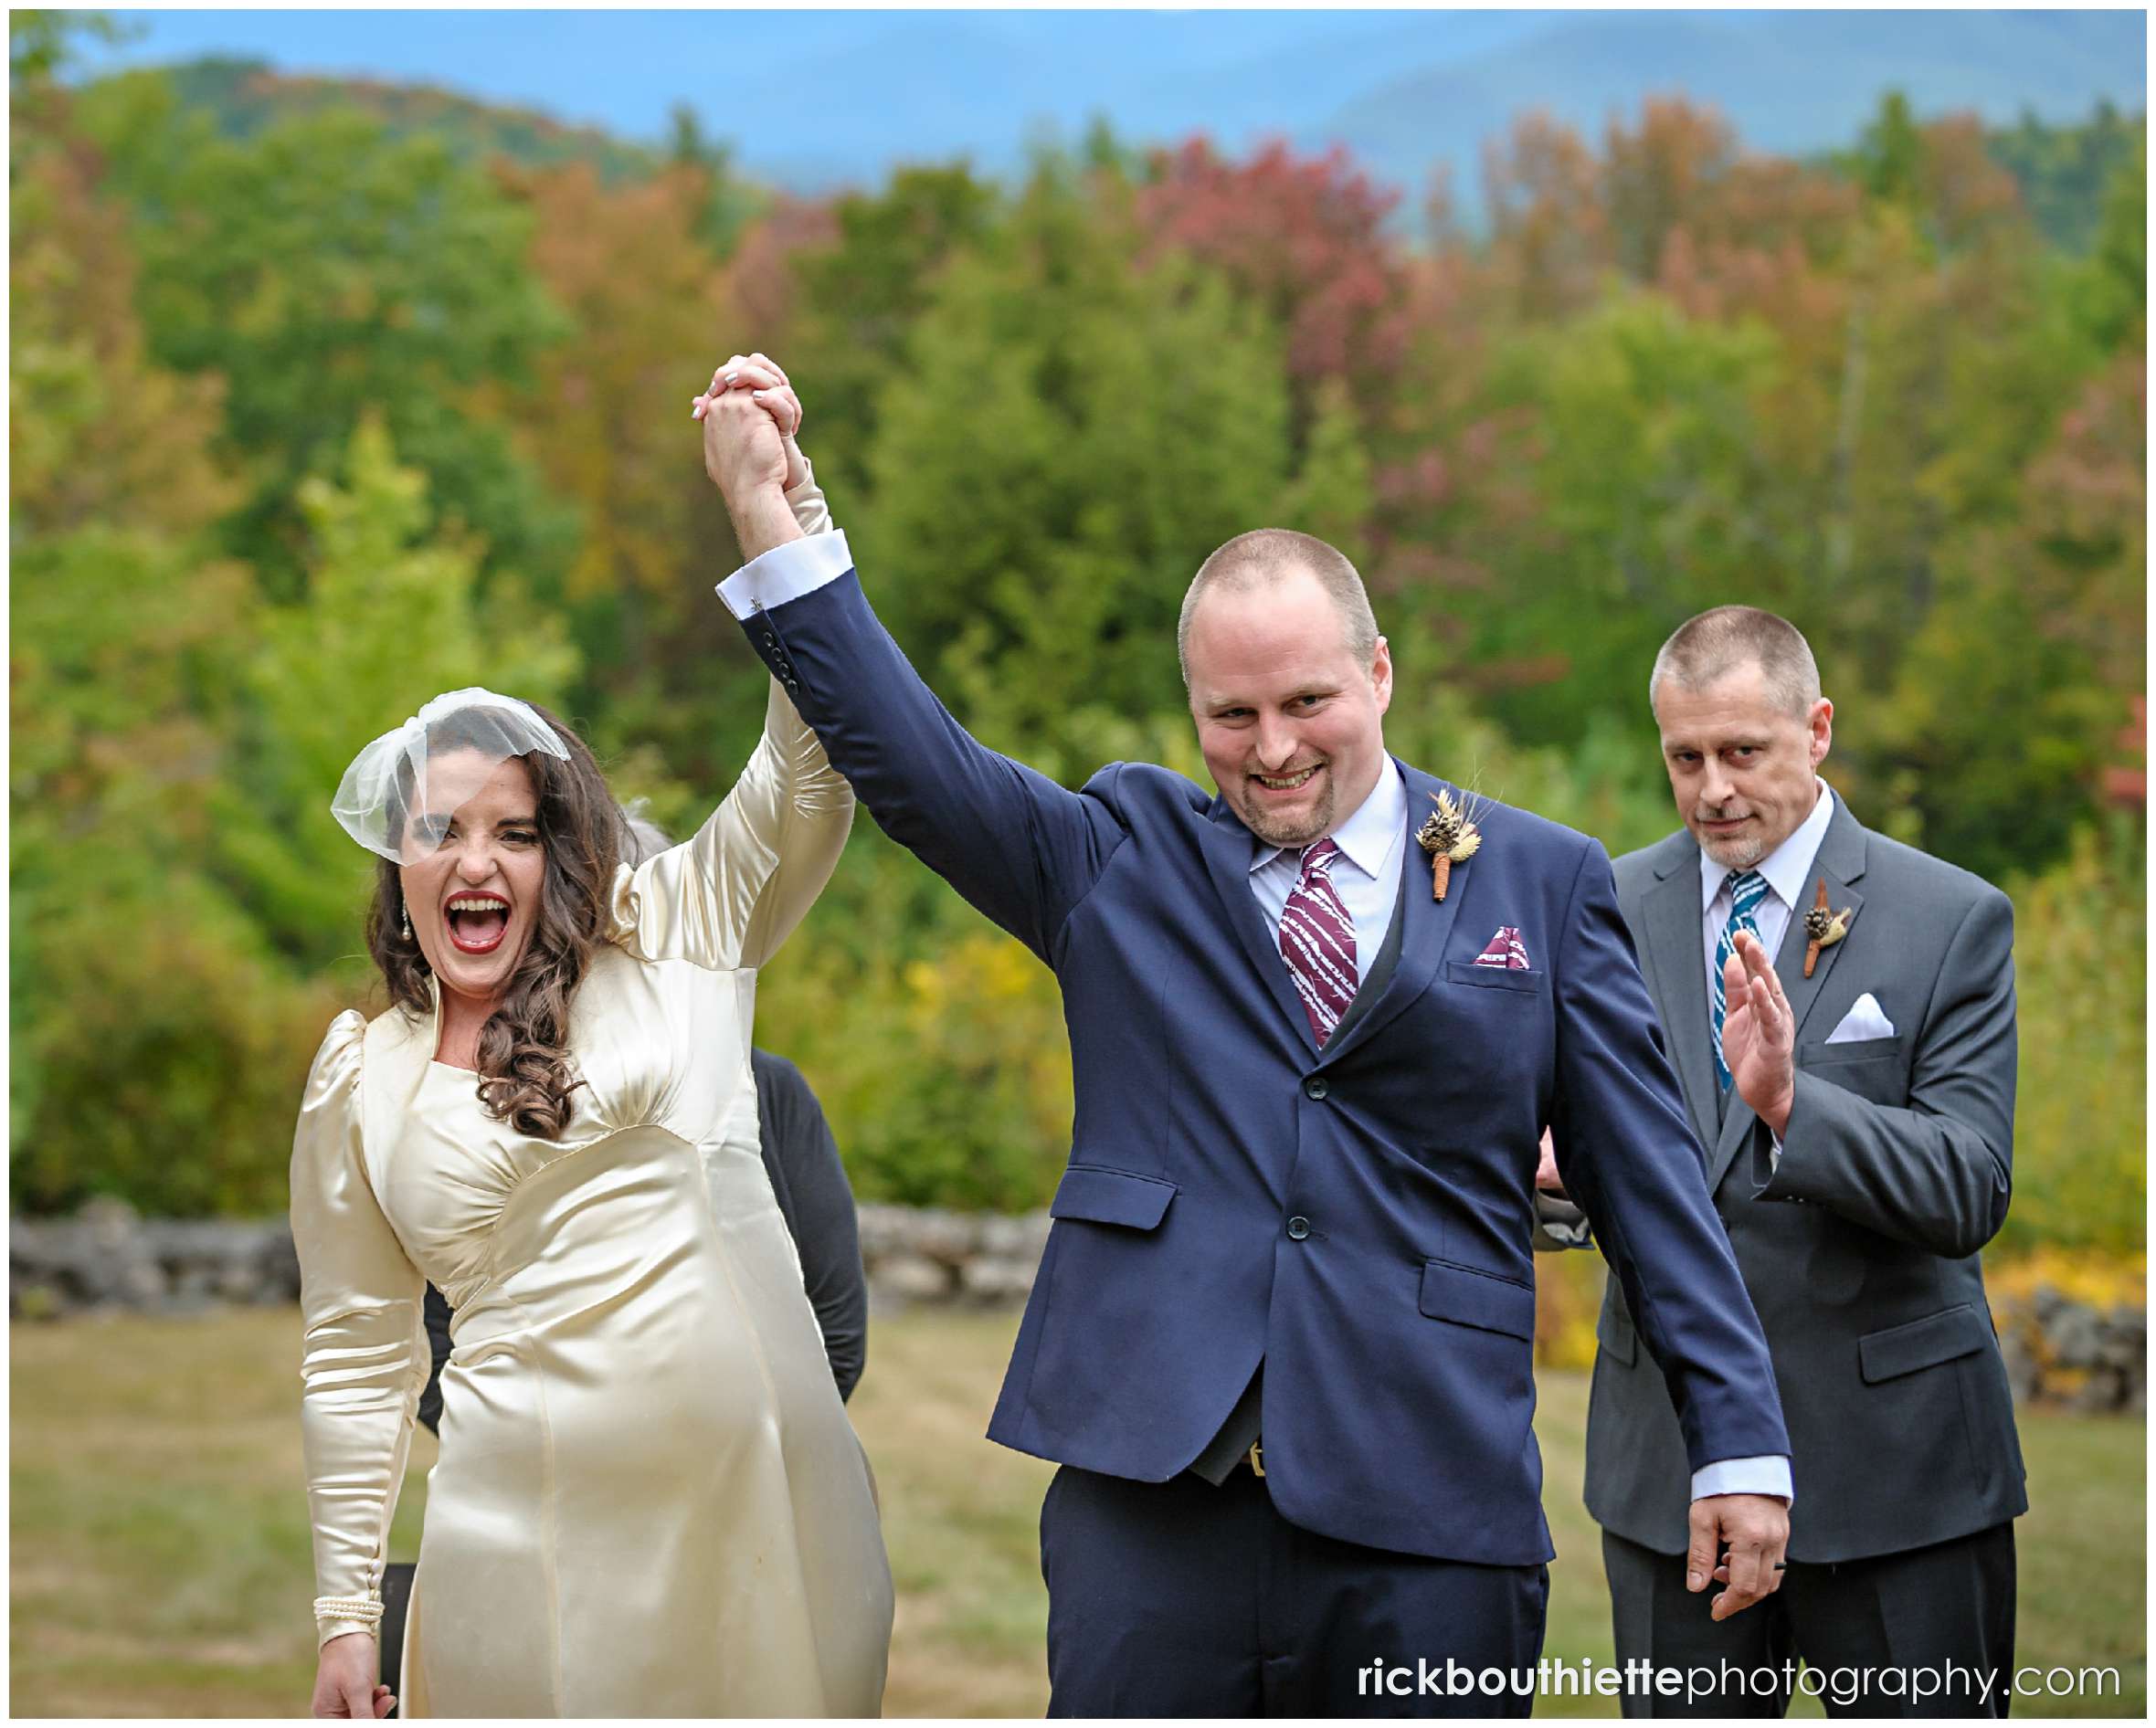 happy bride and groom celebrate as they walk down the aisle after their wedding ceremony